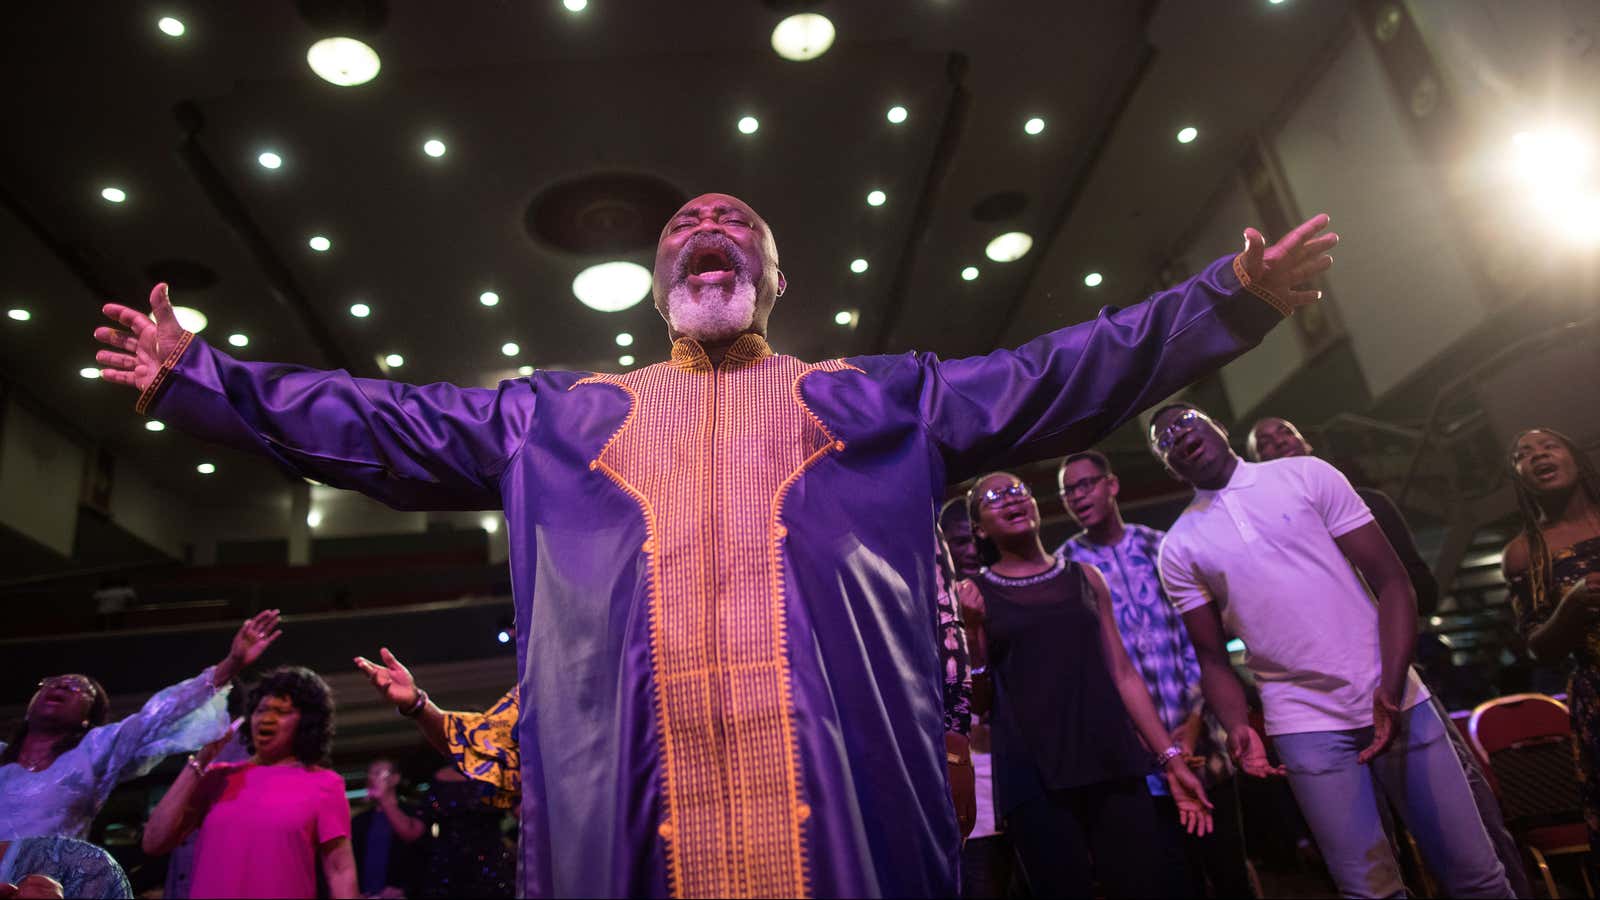 Worshippers, many of Nigerian descent, pray at the House of Praise church in London. April 8, 2018